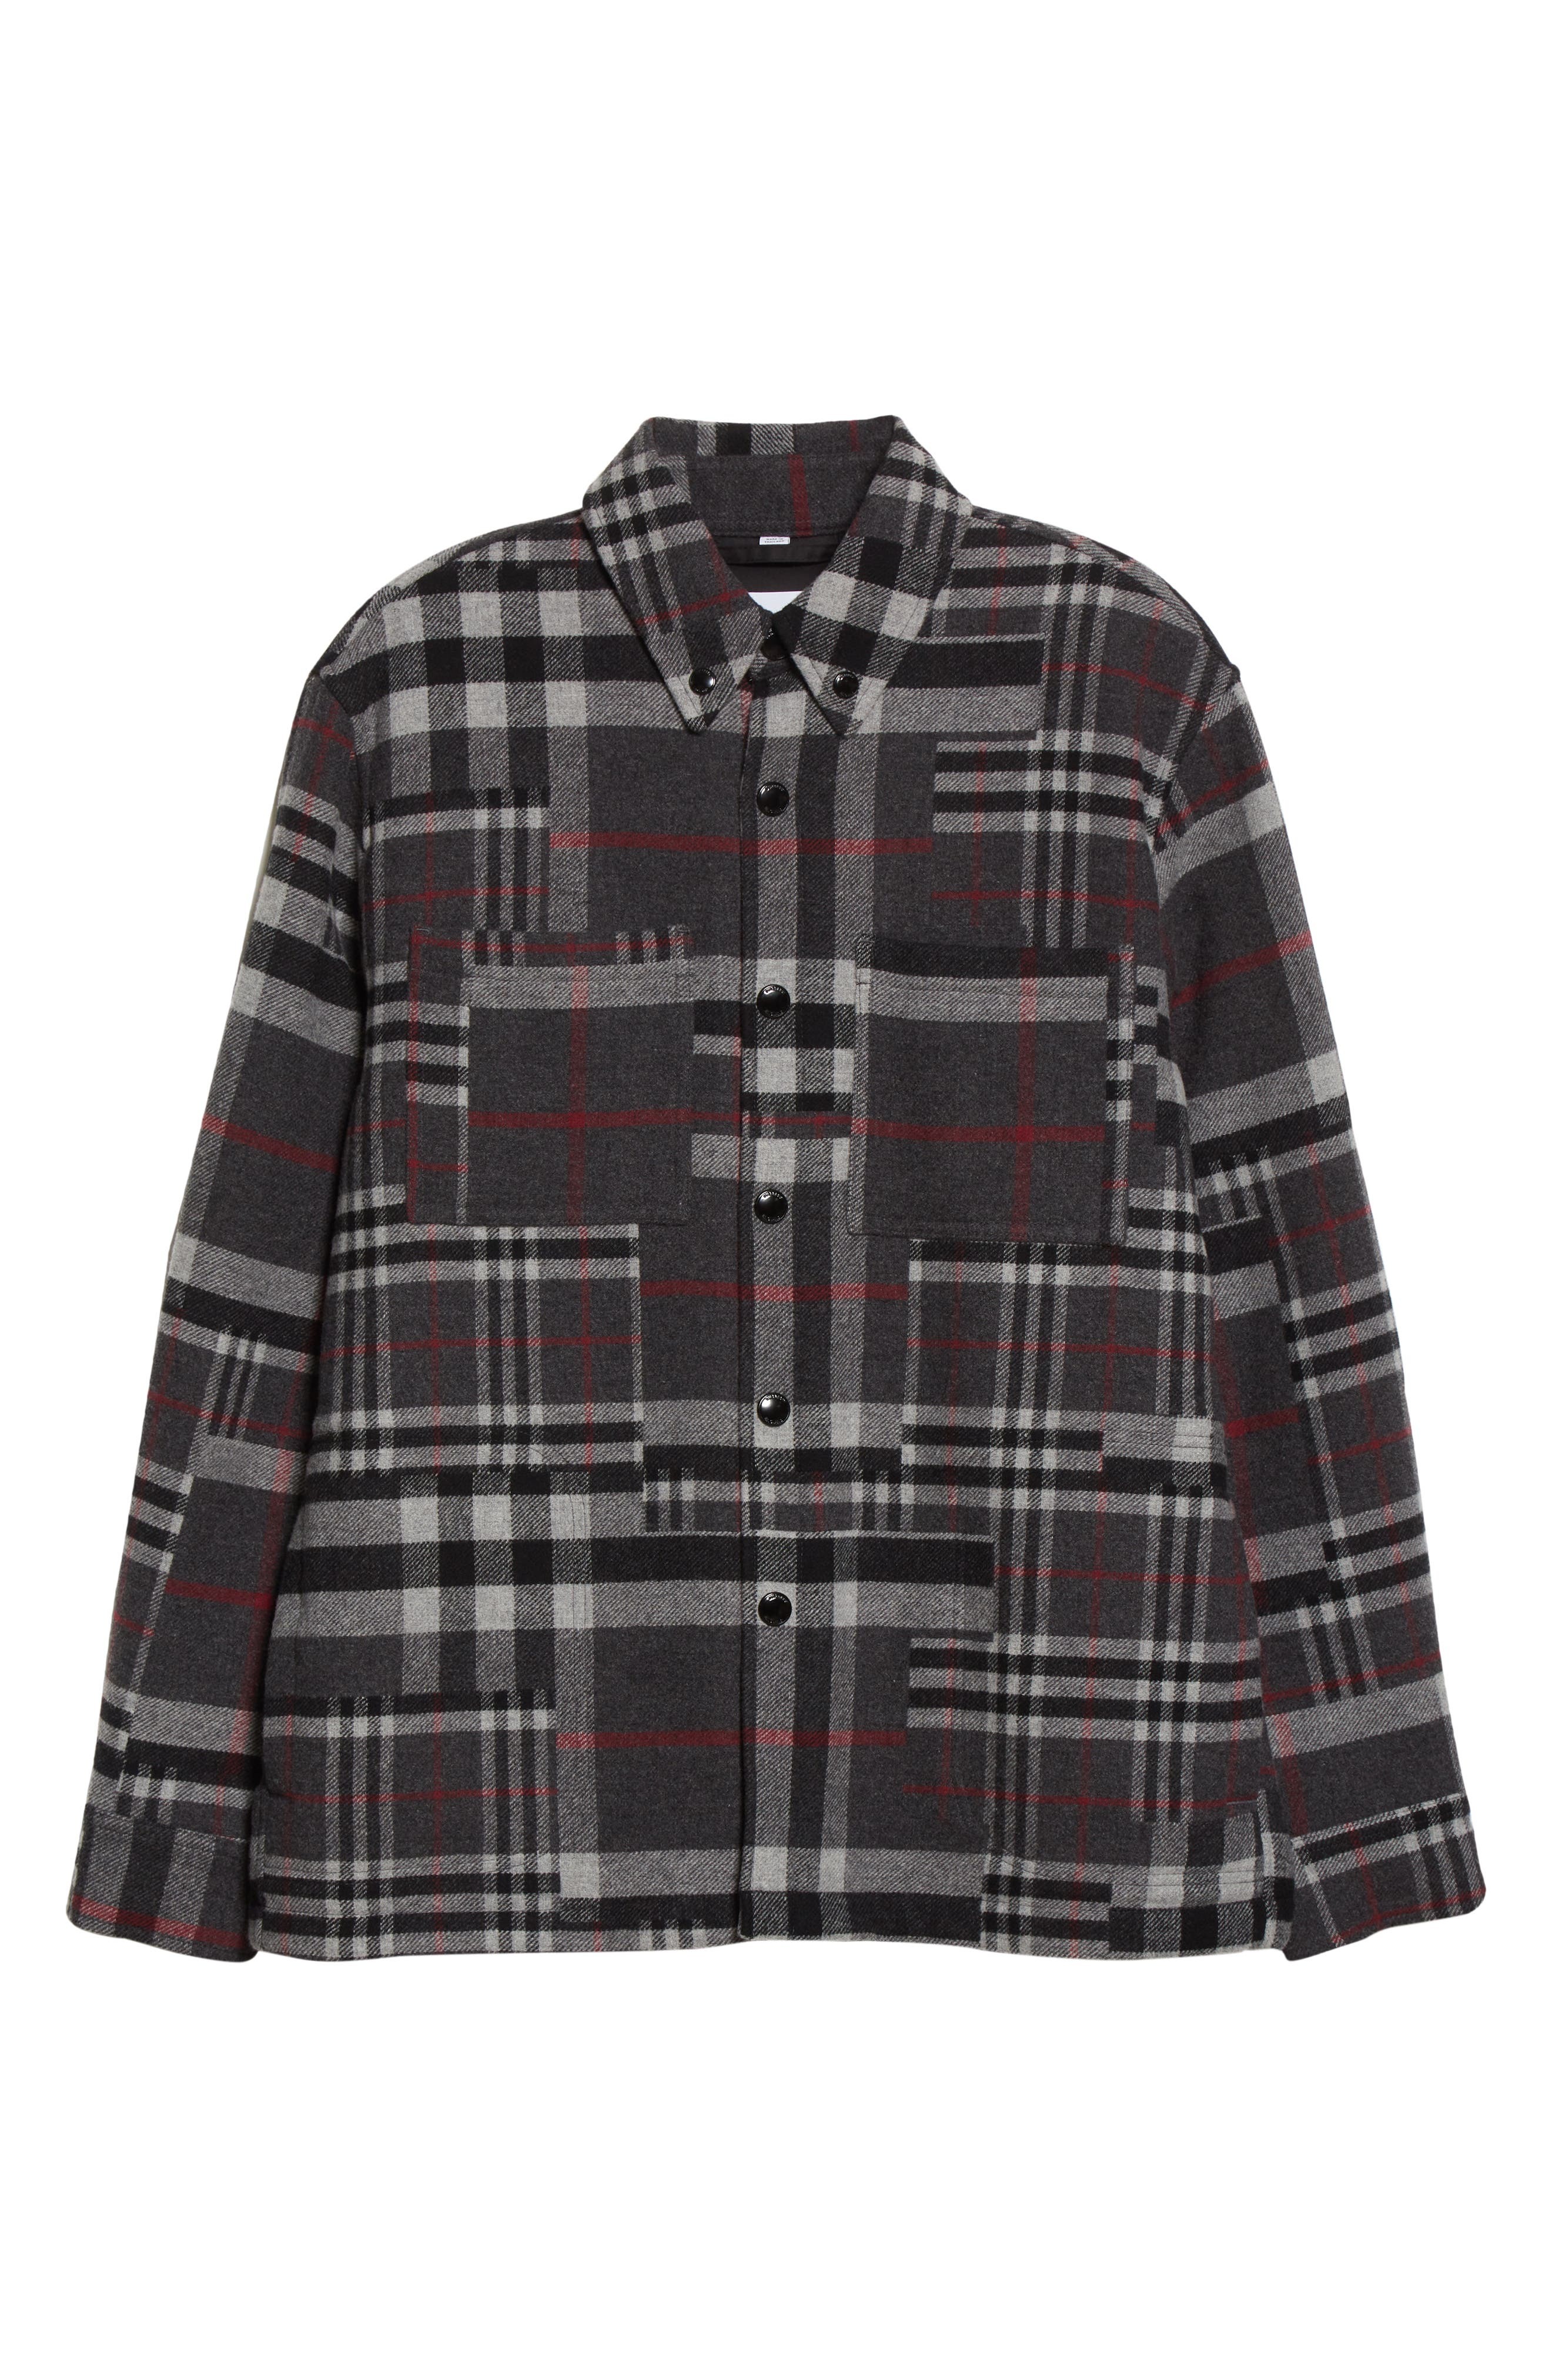 Burberry Caterham Check Patchwork Wool Snap Up Overshirt, $1,050 ...